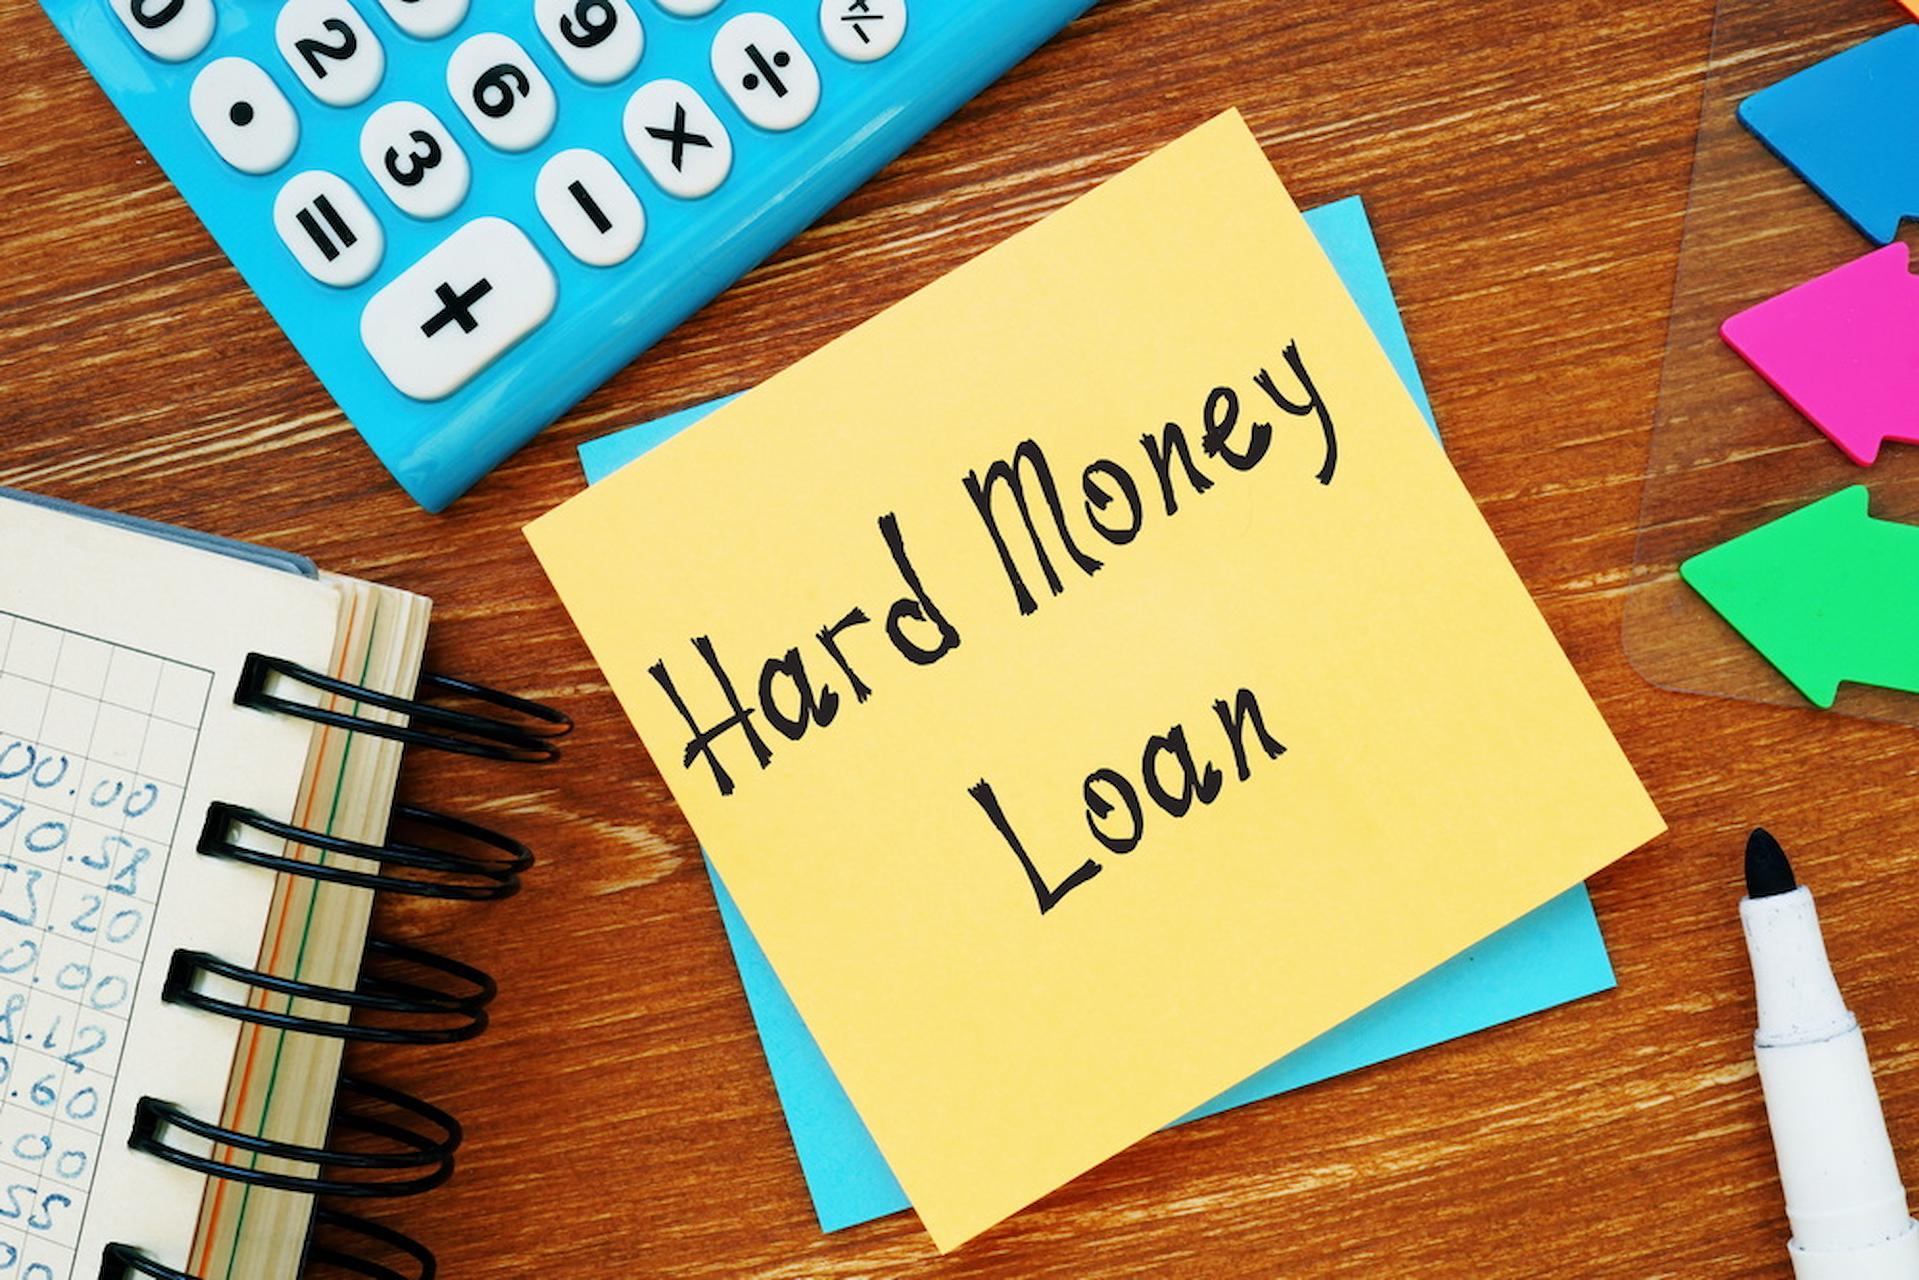 3 Typical Uses For Hard Money And Bridge Loans